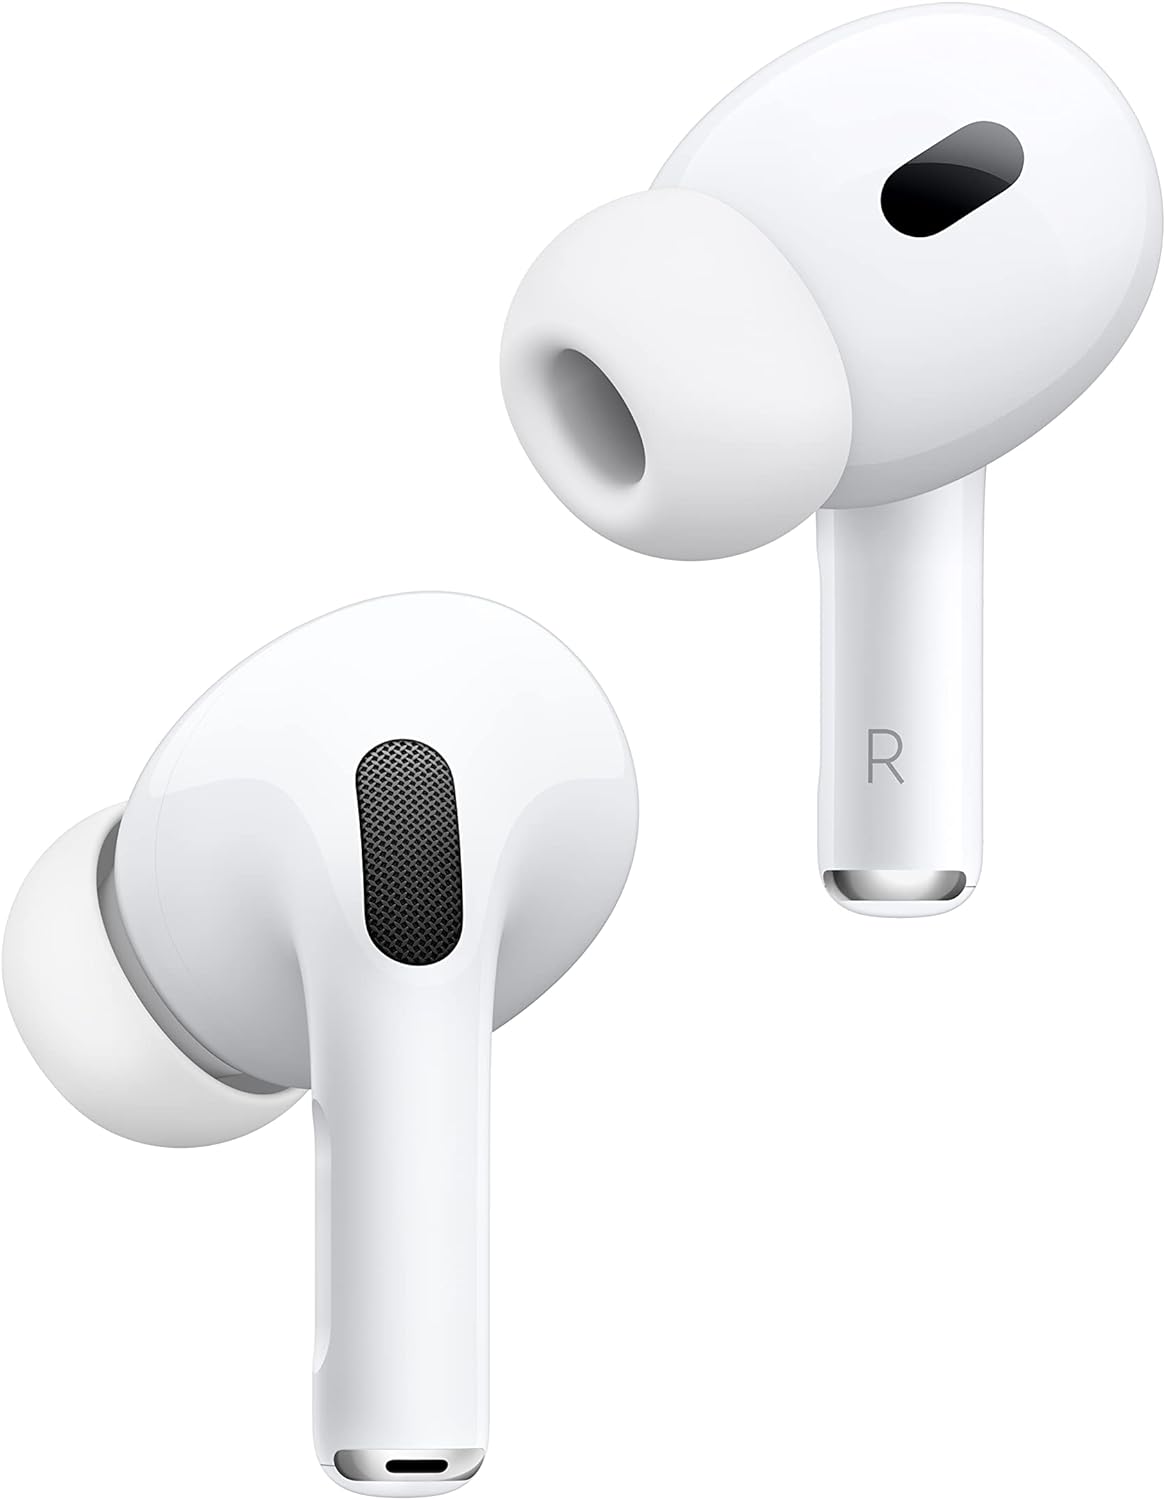 Apple AirPods Pro (2nd Gen) Wireless Earbuds, Up to 2X More Active Noise Cancelling, Adaptive Transparency, Personalized Spatial Audio MagSafe Charging Case (USB-C) Bluetooth Headphones for iPhone: Detailed Review & Recommendations